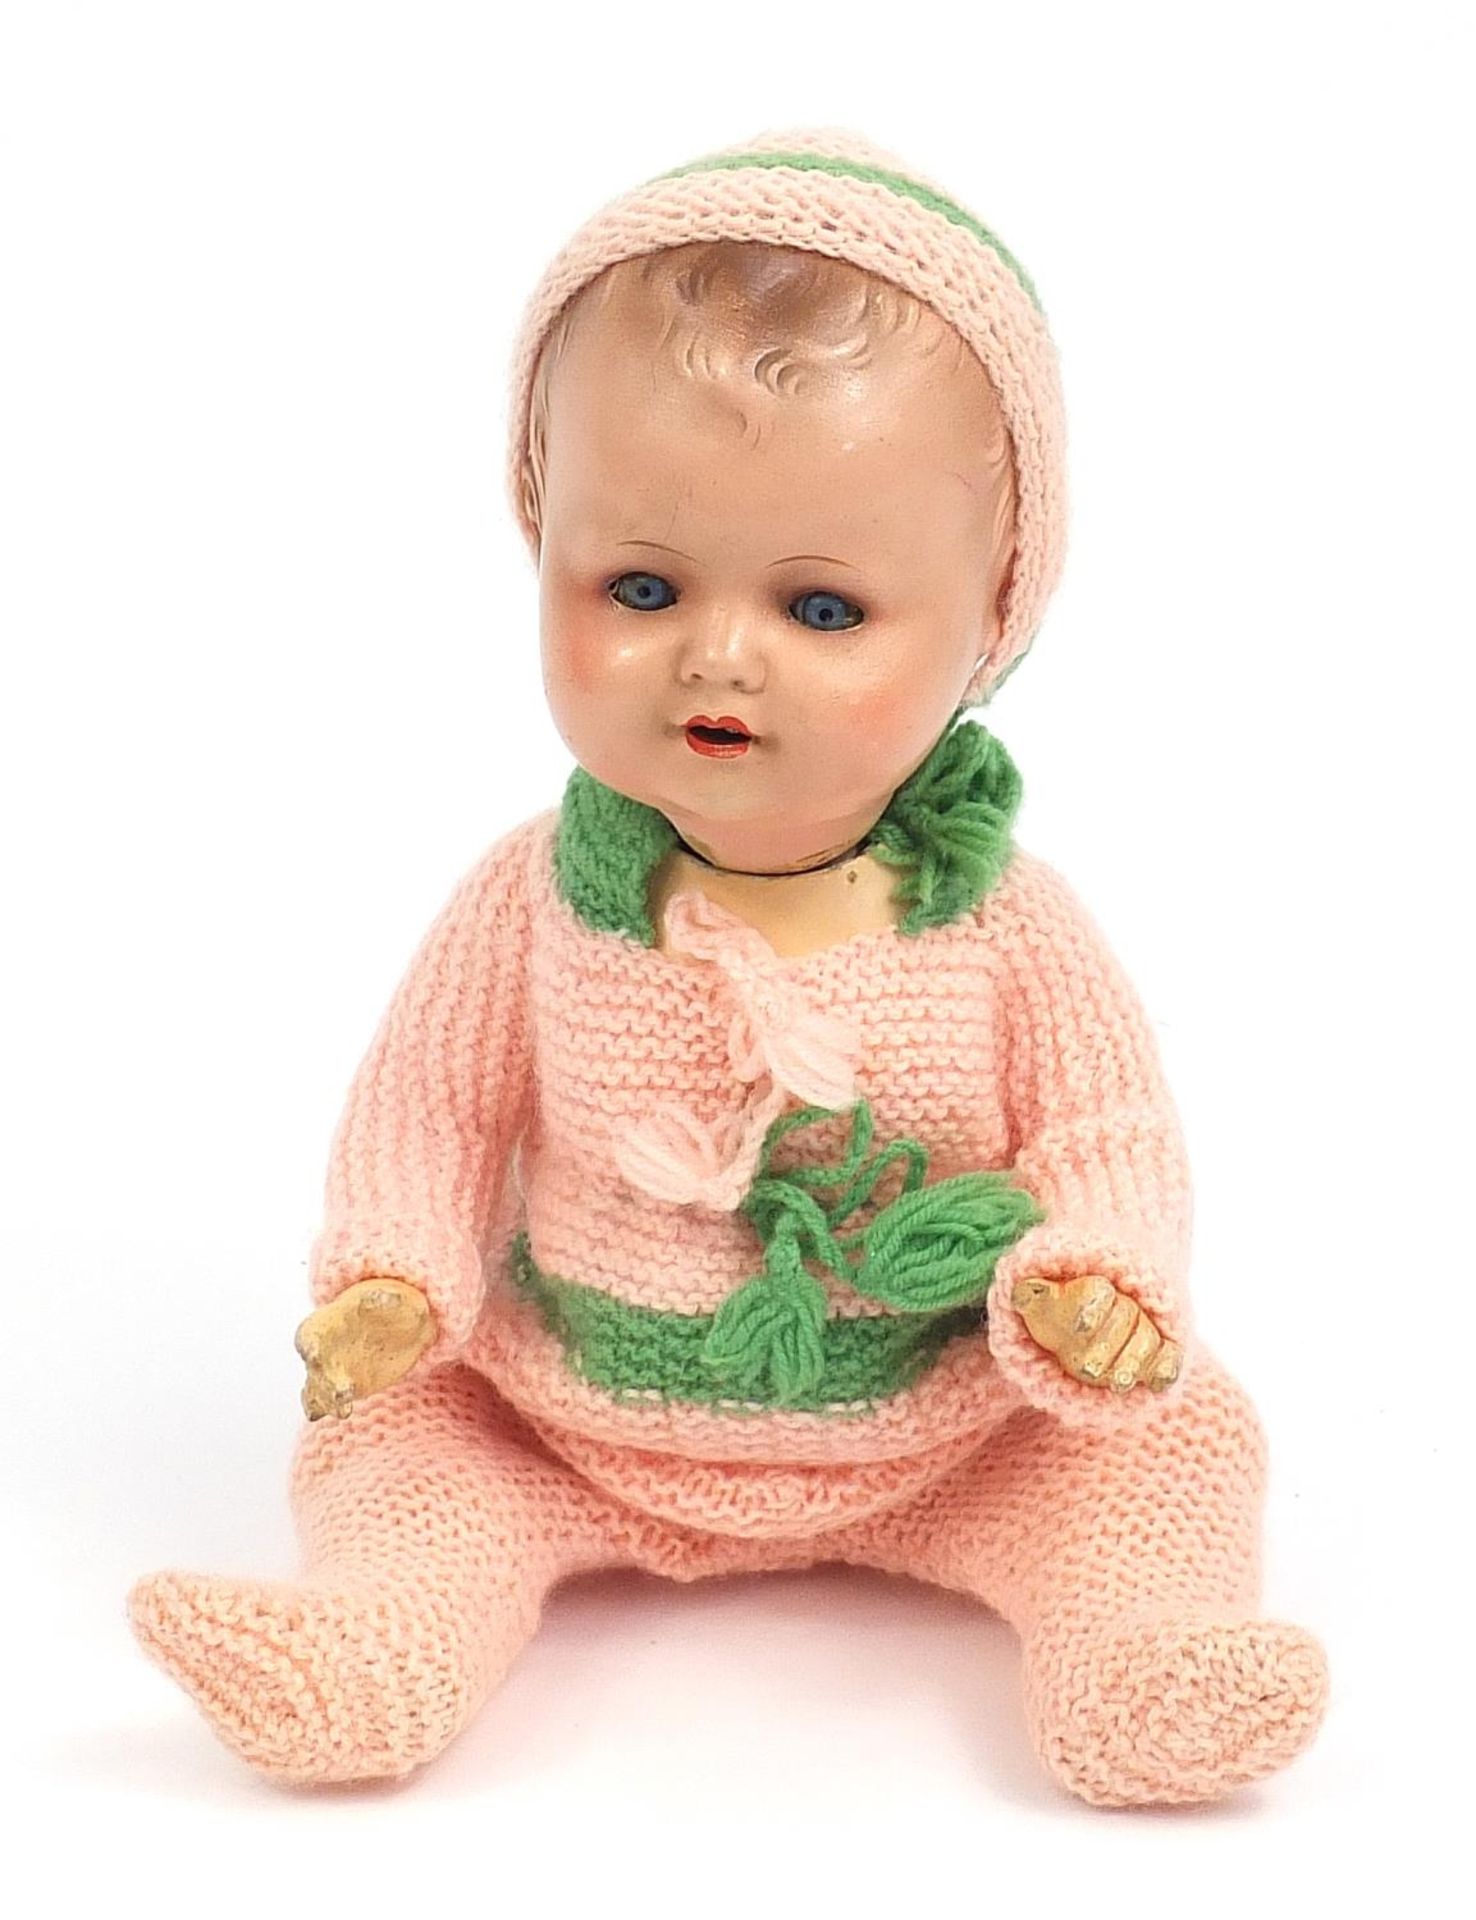 Armand Marseille baby doll with open mouth, 35cm high - Image 2 of 5